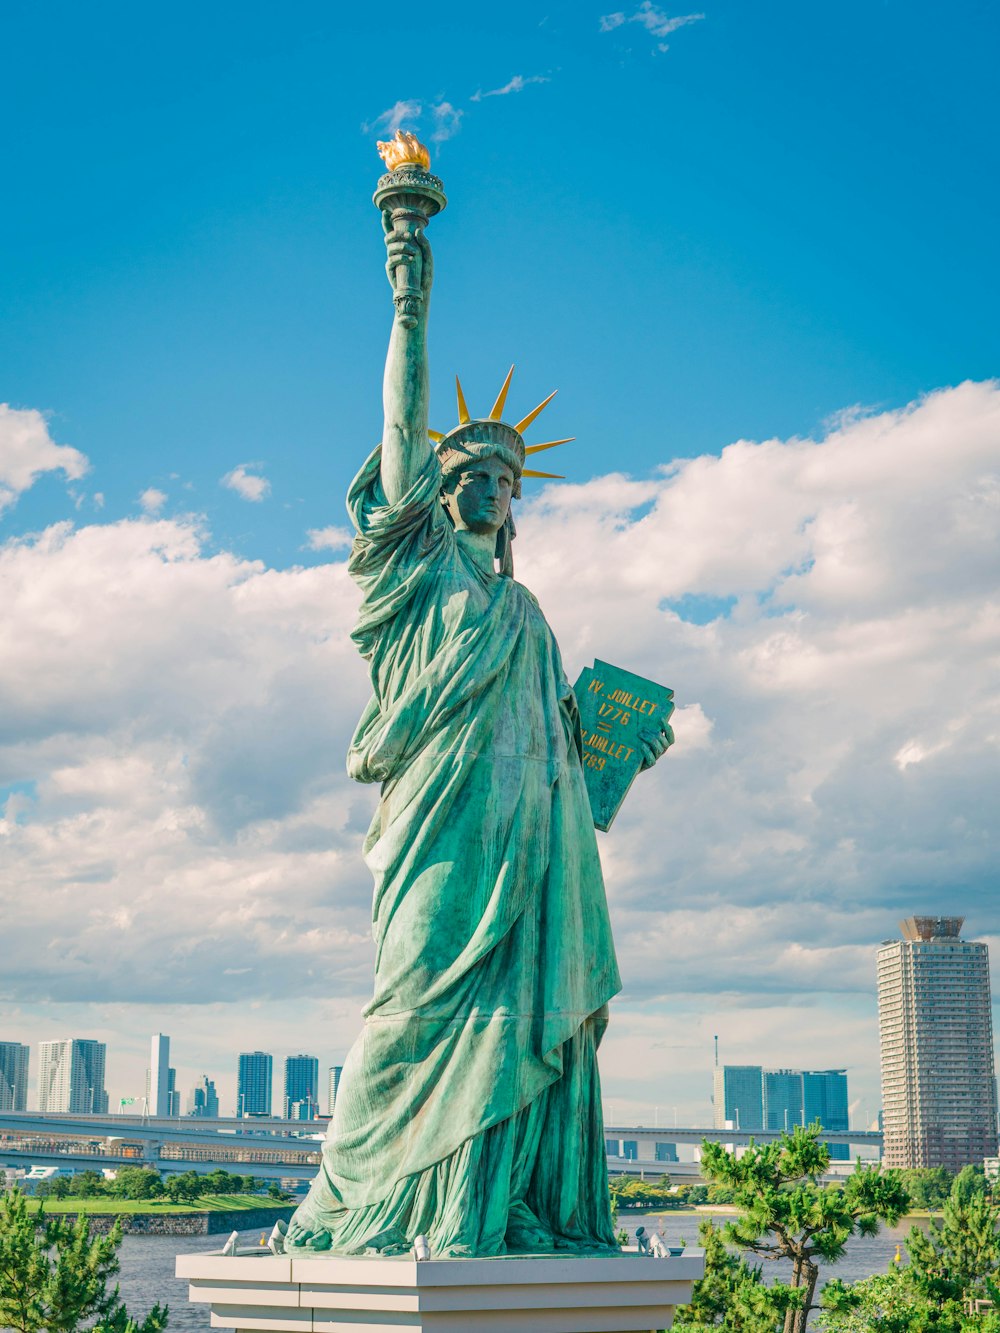 Statue of Liberty at New York New York … – License image – 70261689 ❘  lookphotos